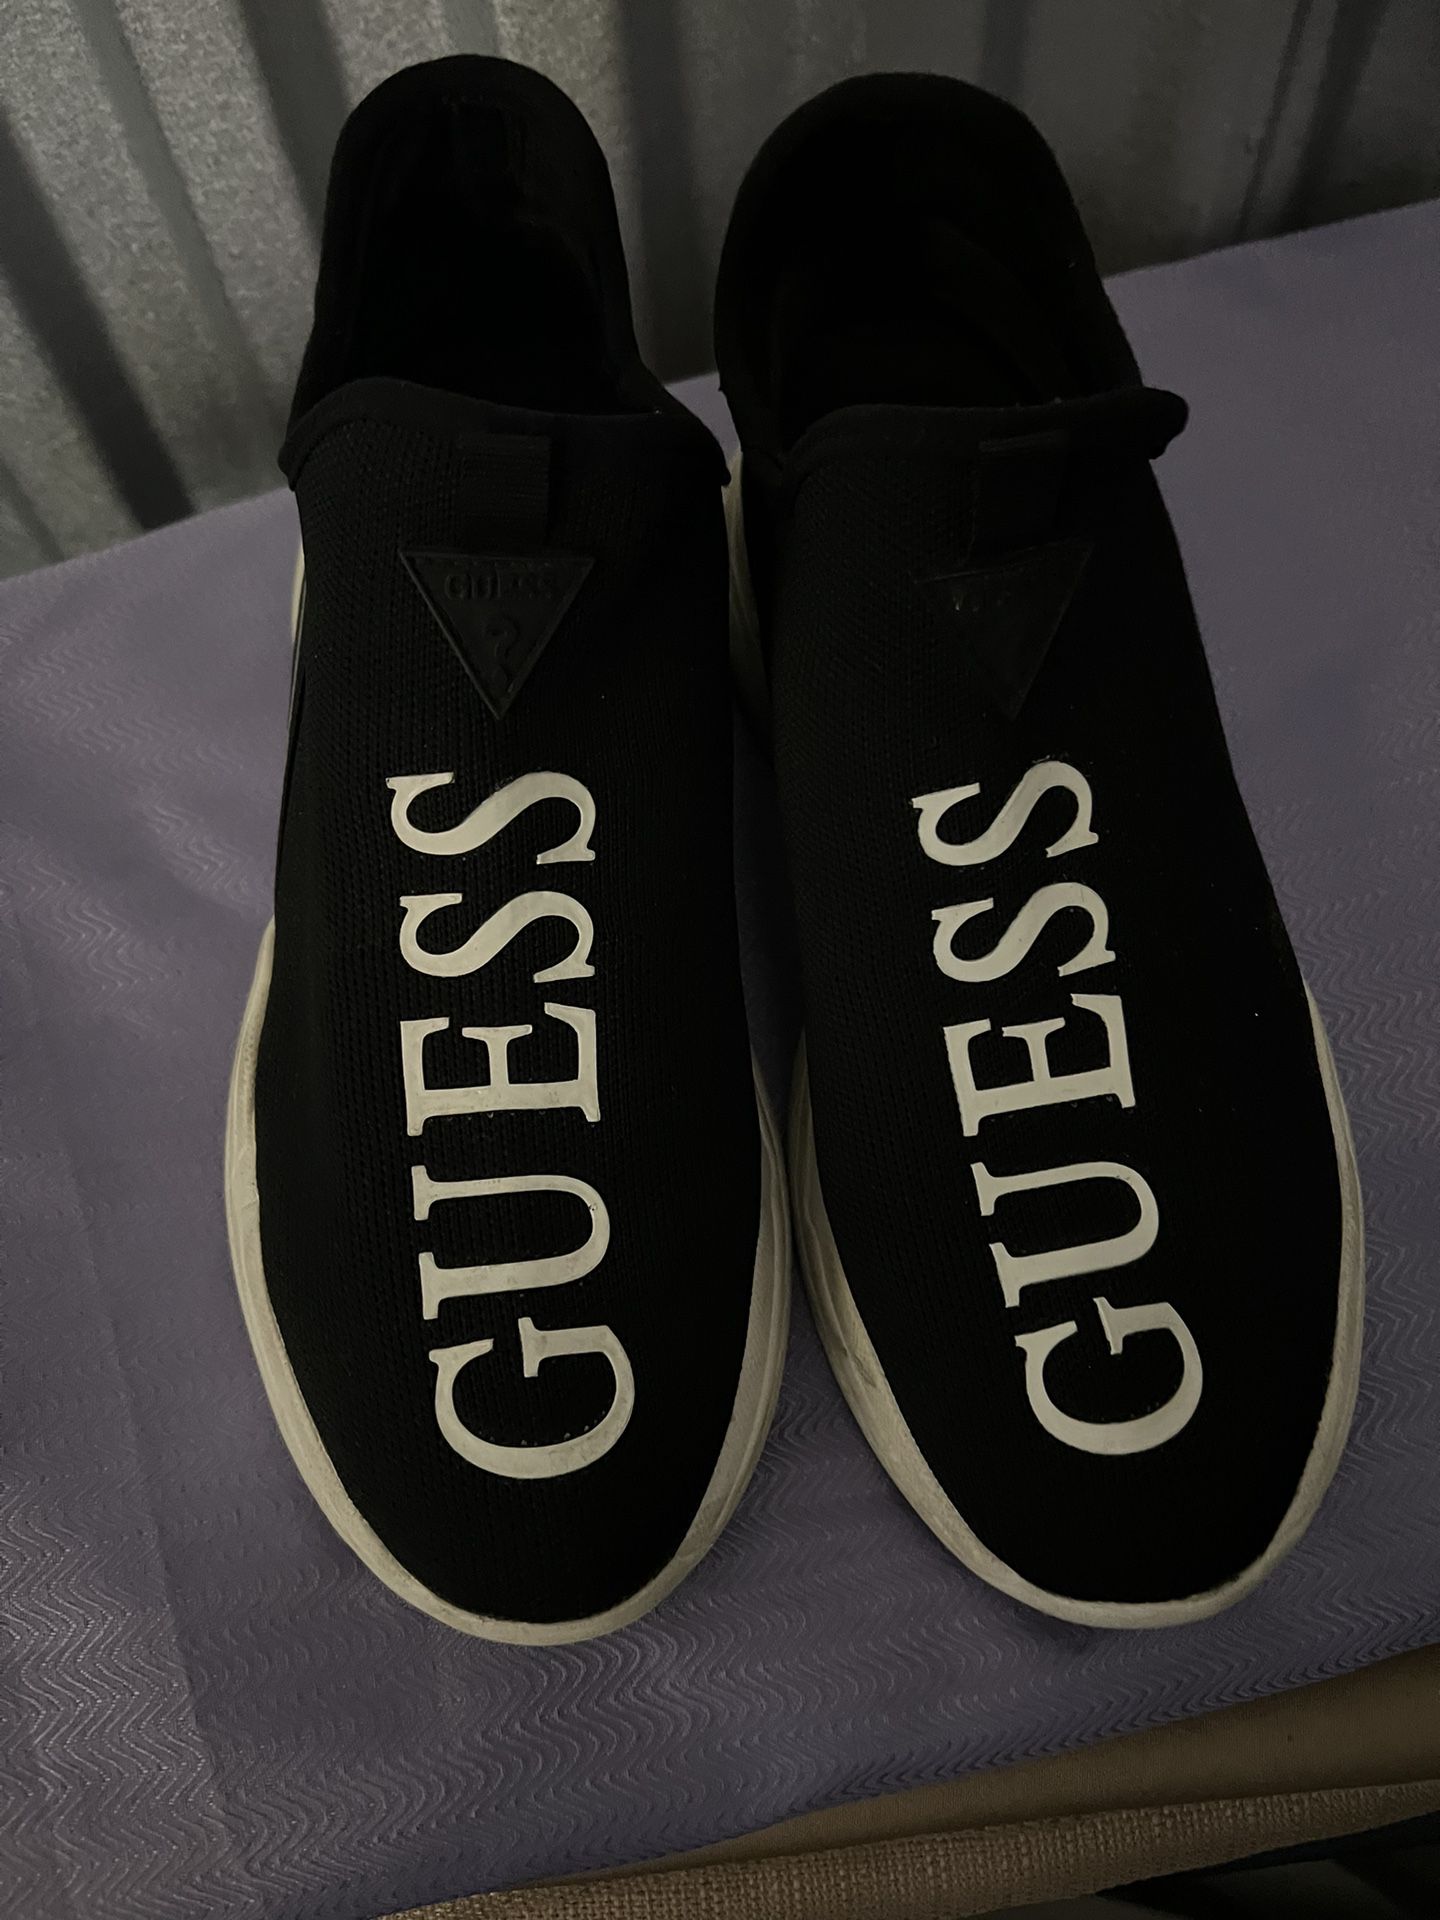 Guess Tennis Shoes